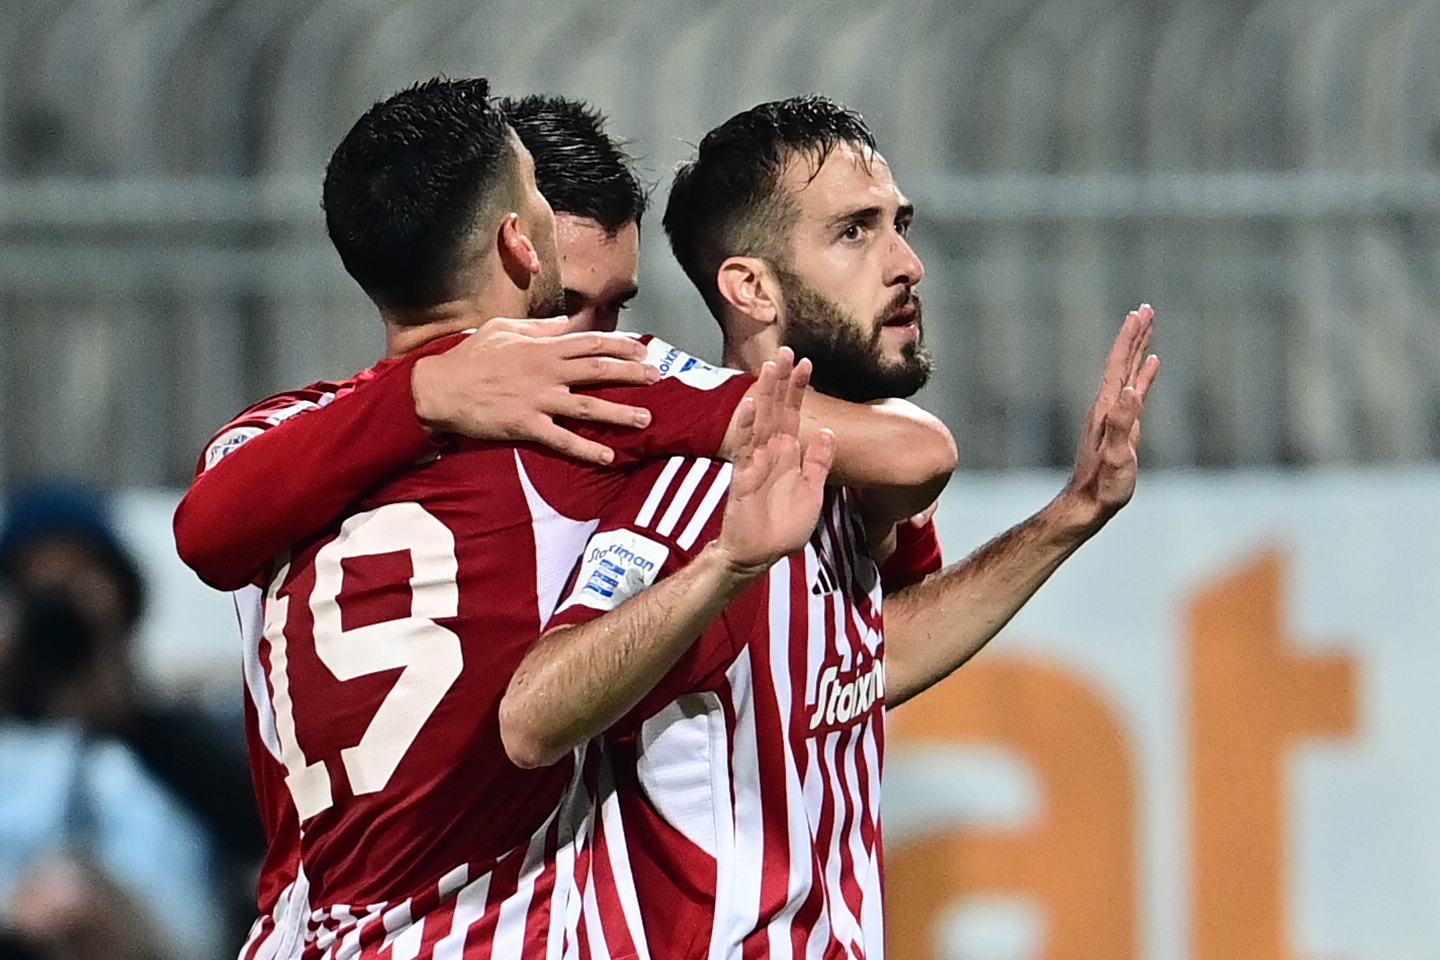 Shining Fortounis raises Olympiacos to victory in Tripolis